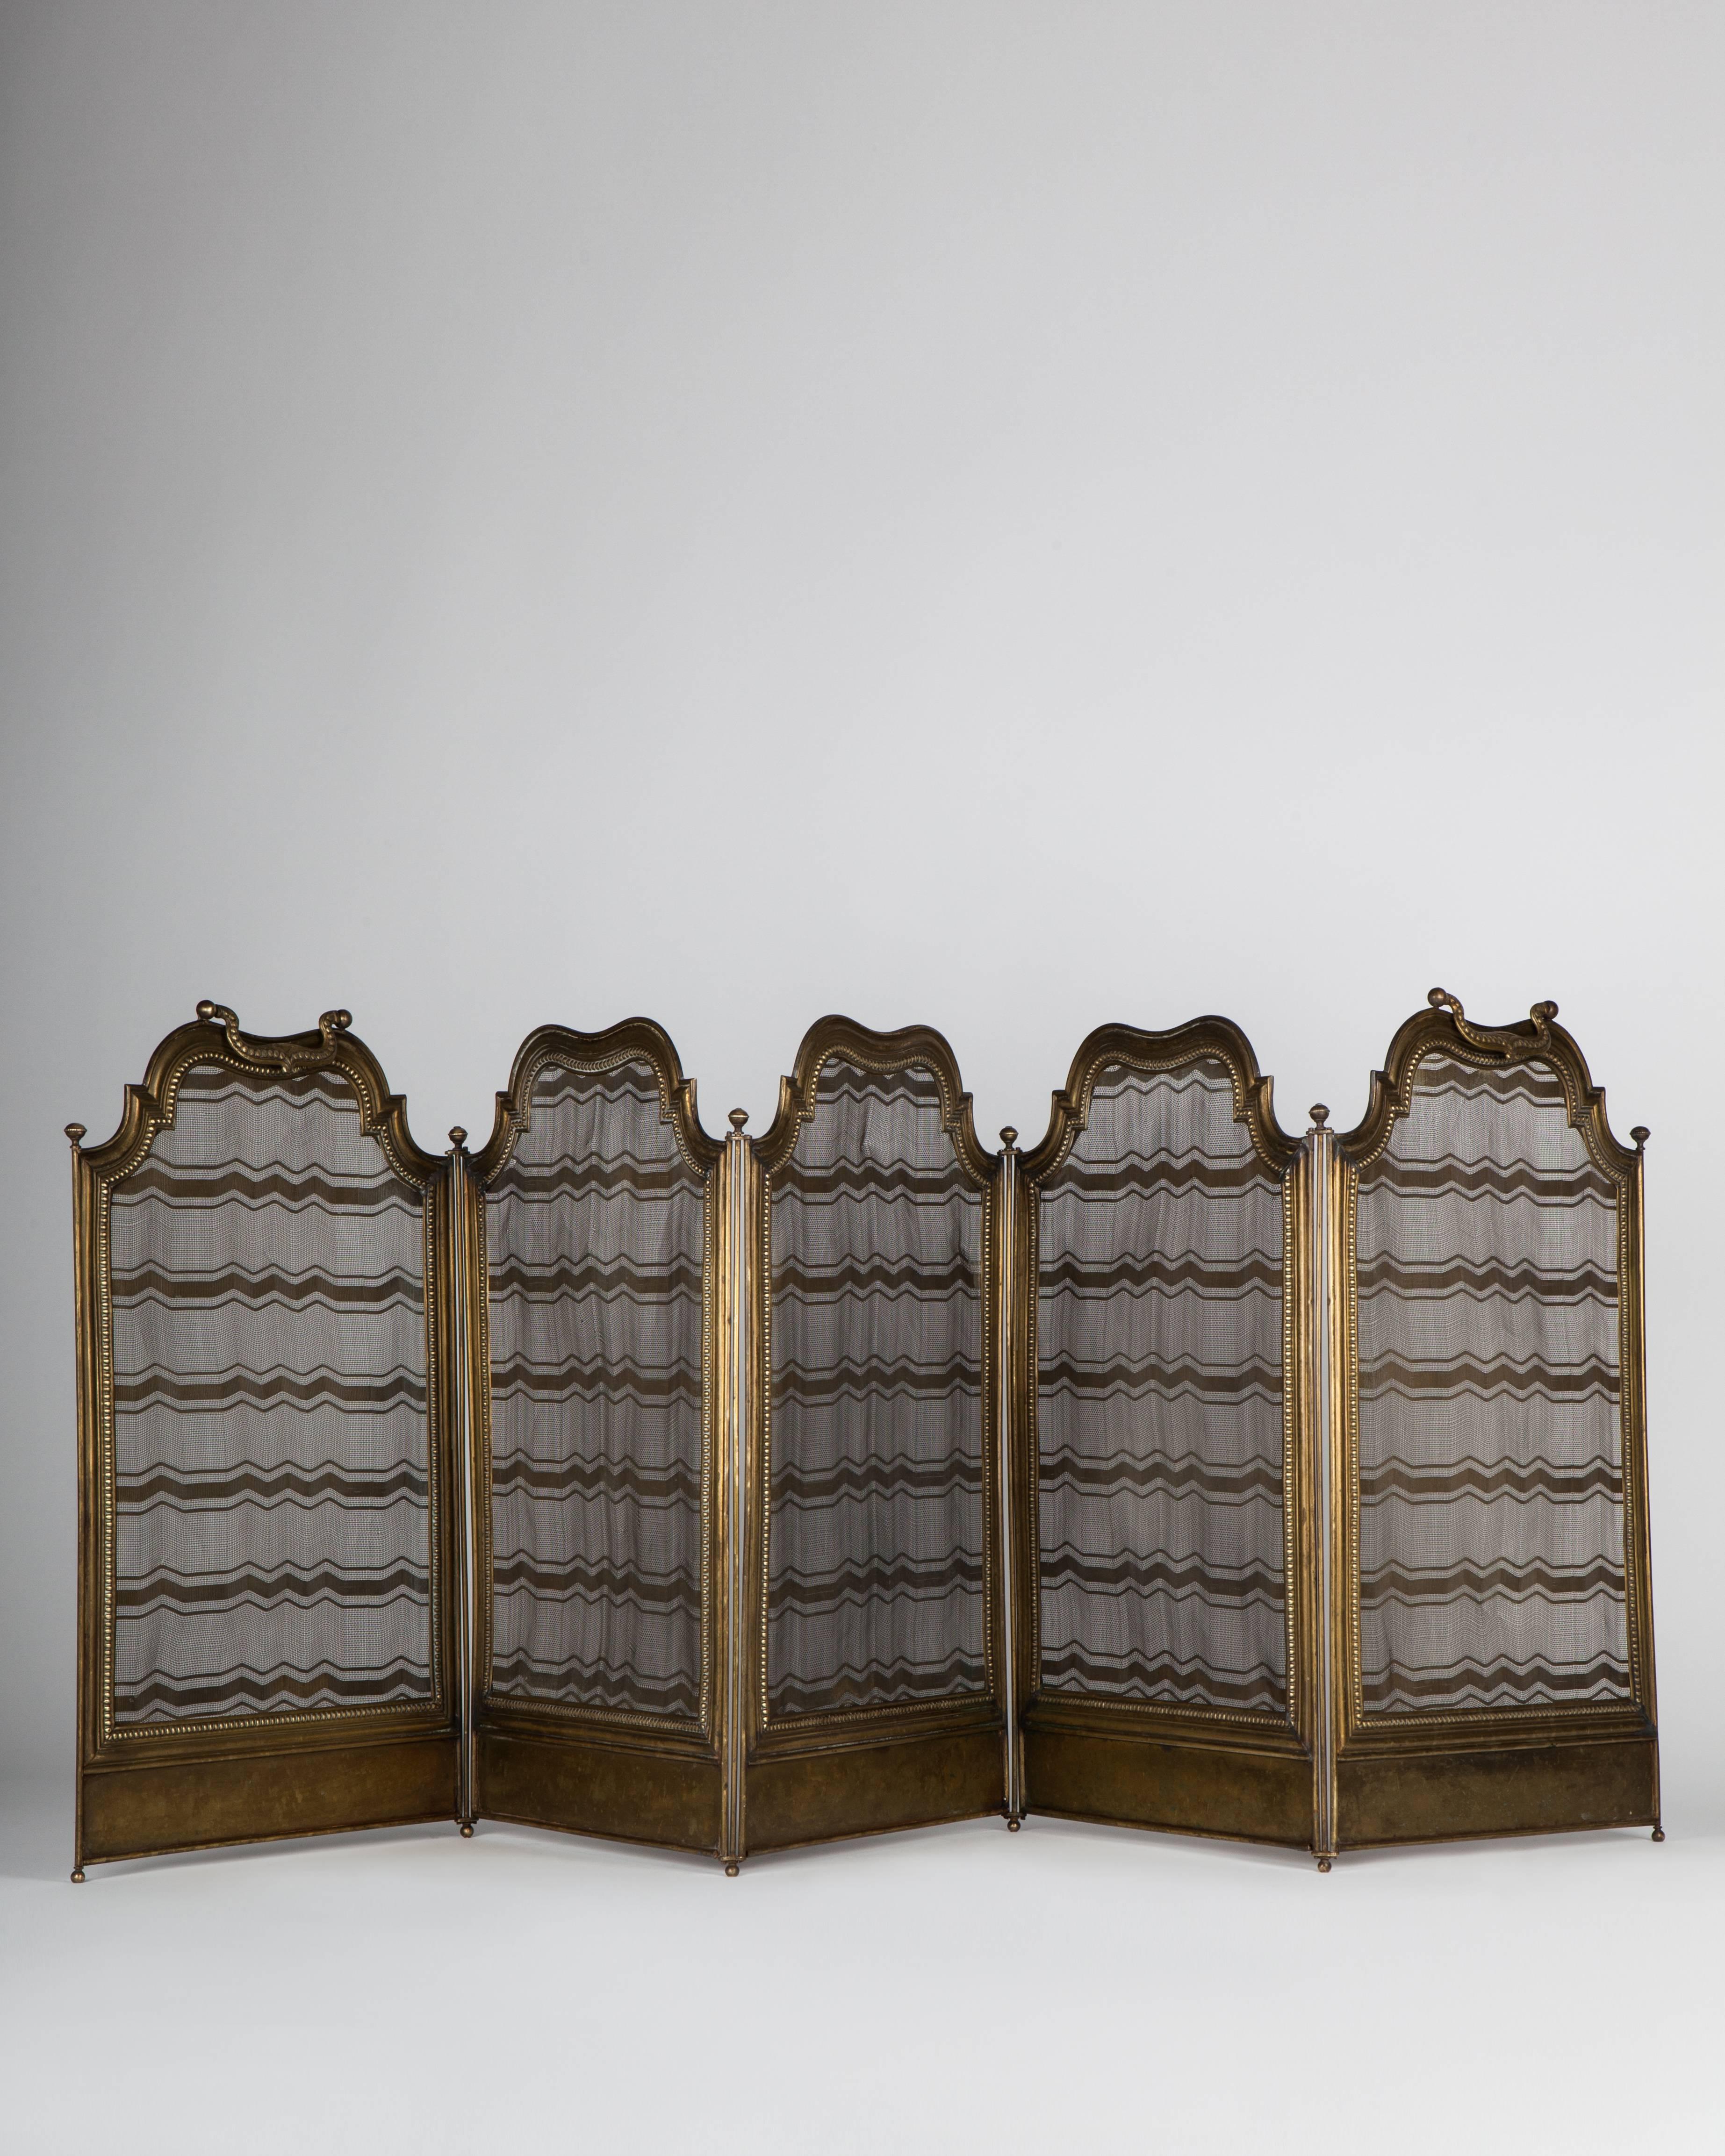 AFP0536
A vintage five-panel, brass folding fire screen in its original age darkened patina, having horizontal wave-like bands of brass mesh set in frames with beaded details.

Dimensions:
Overall (extended): 23